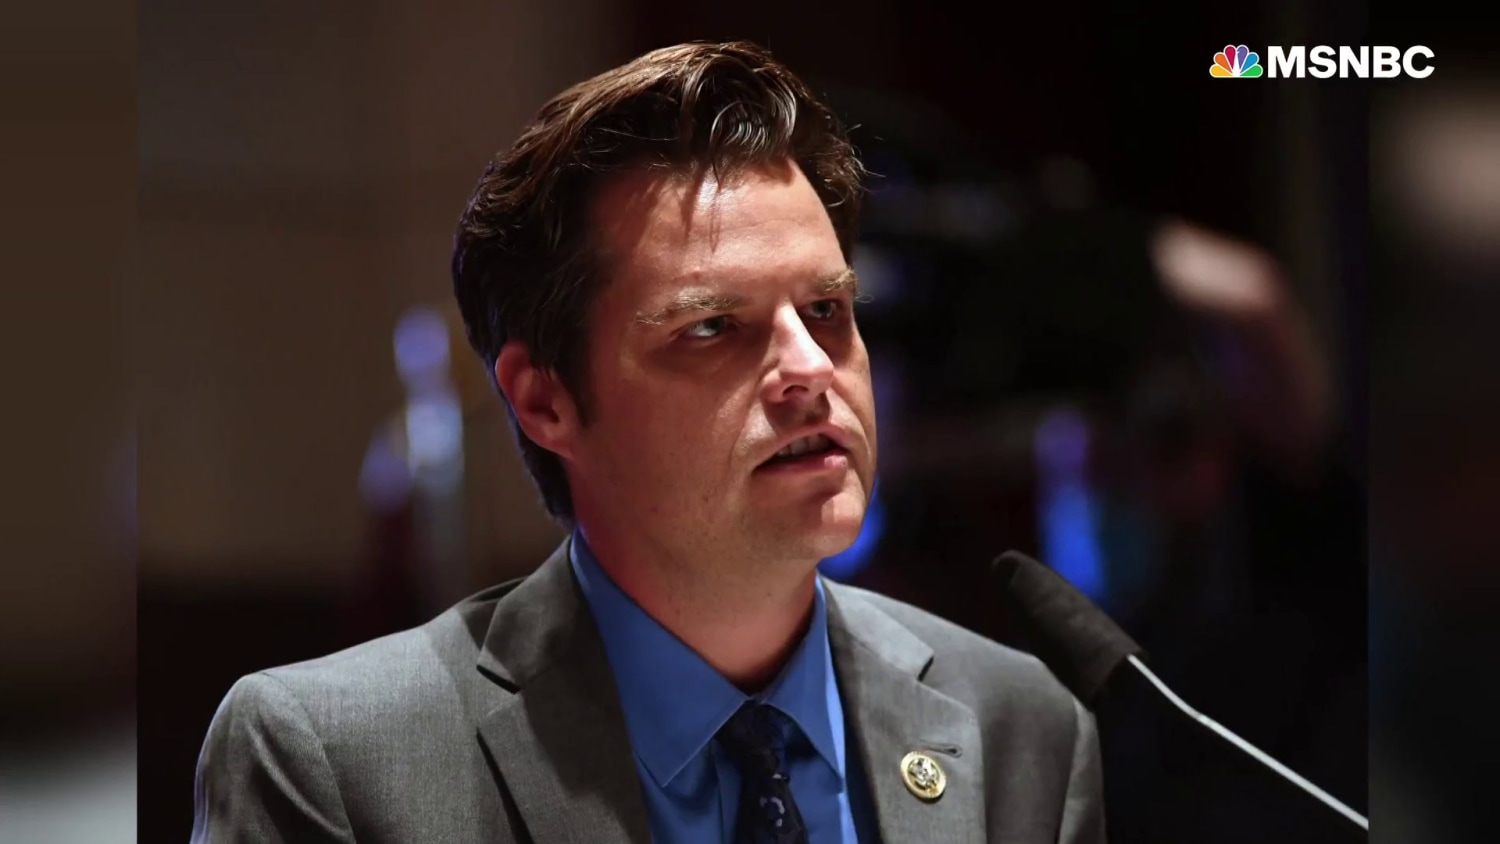 Rep Teen Girl - The Justice Department's sex trafficking investigation into Rep. Matt Gaetz  seems stalled, attorneys say